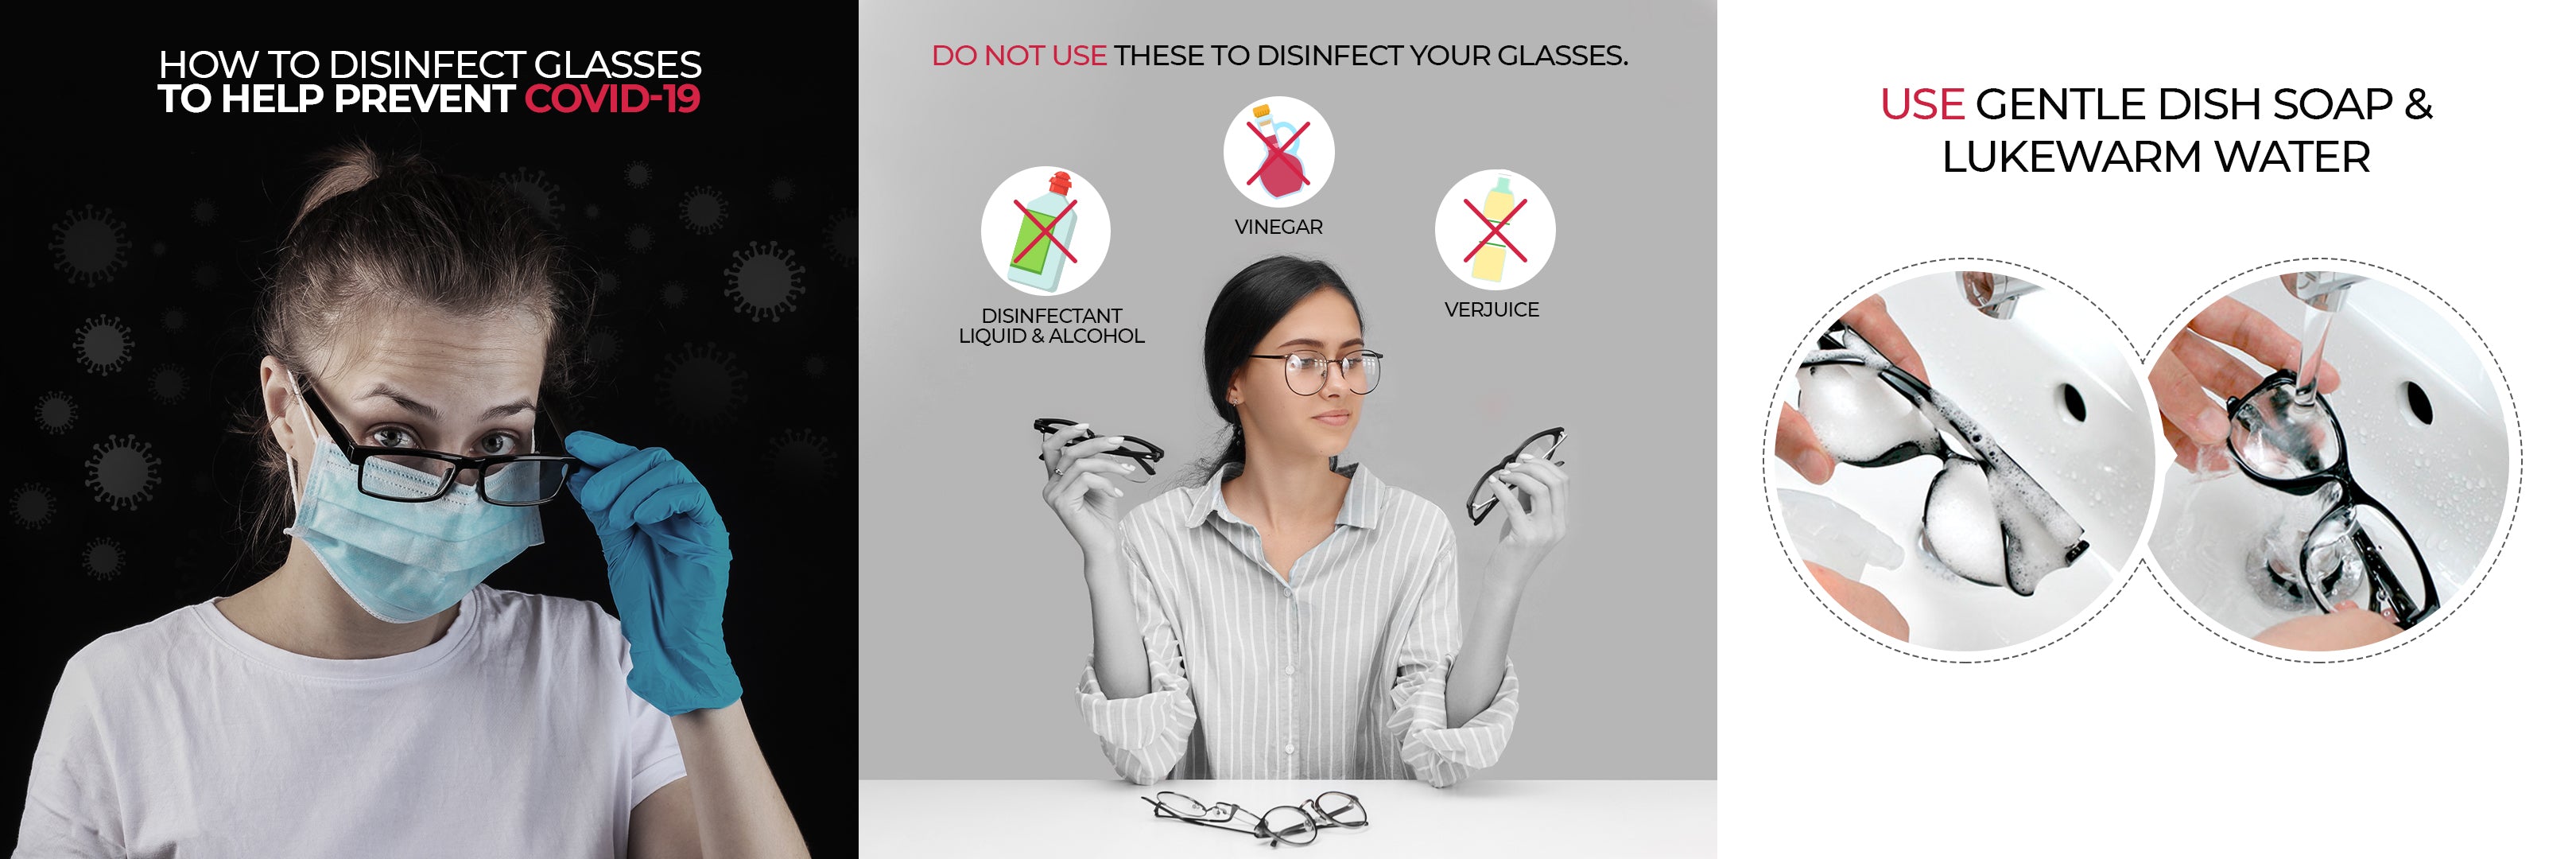 How to Disinfect Glasses to Help Prevent COVID-19